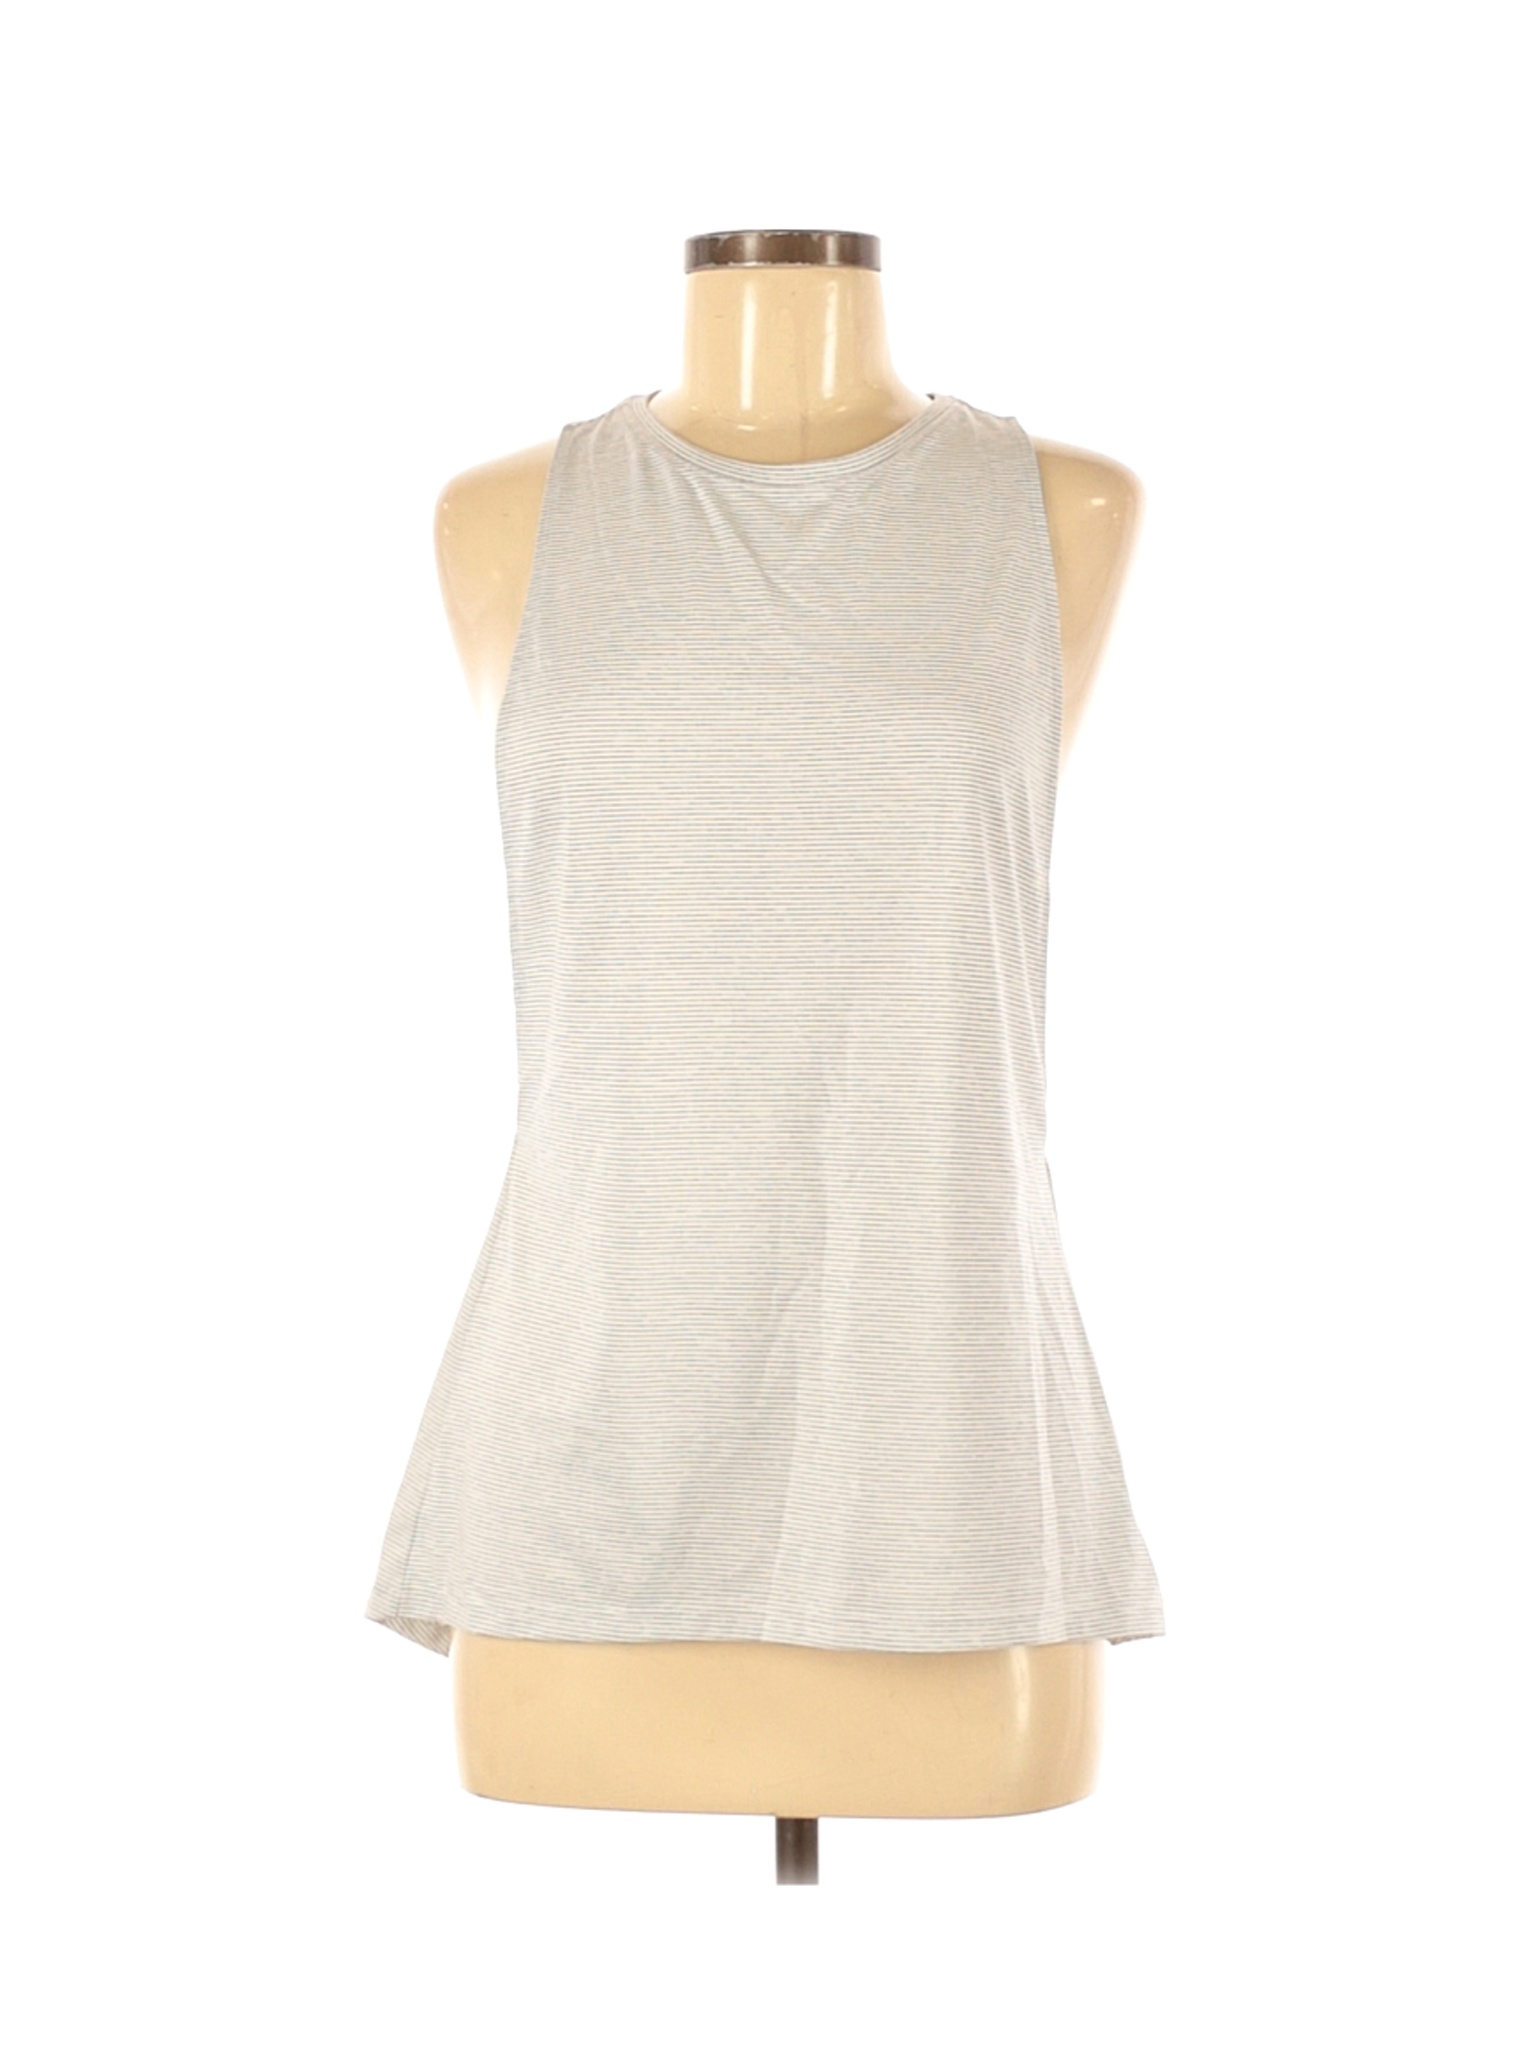 Active by Old Navy Women Ivory Active T-Shirt M | eBay